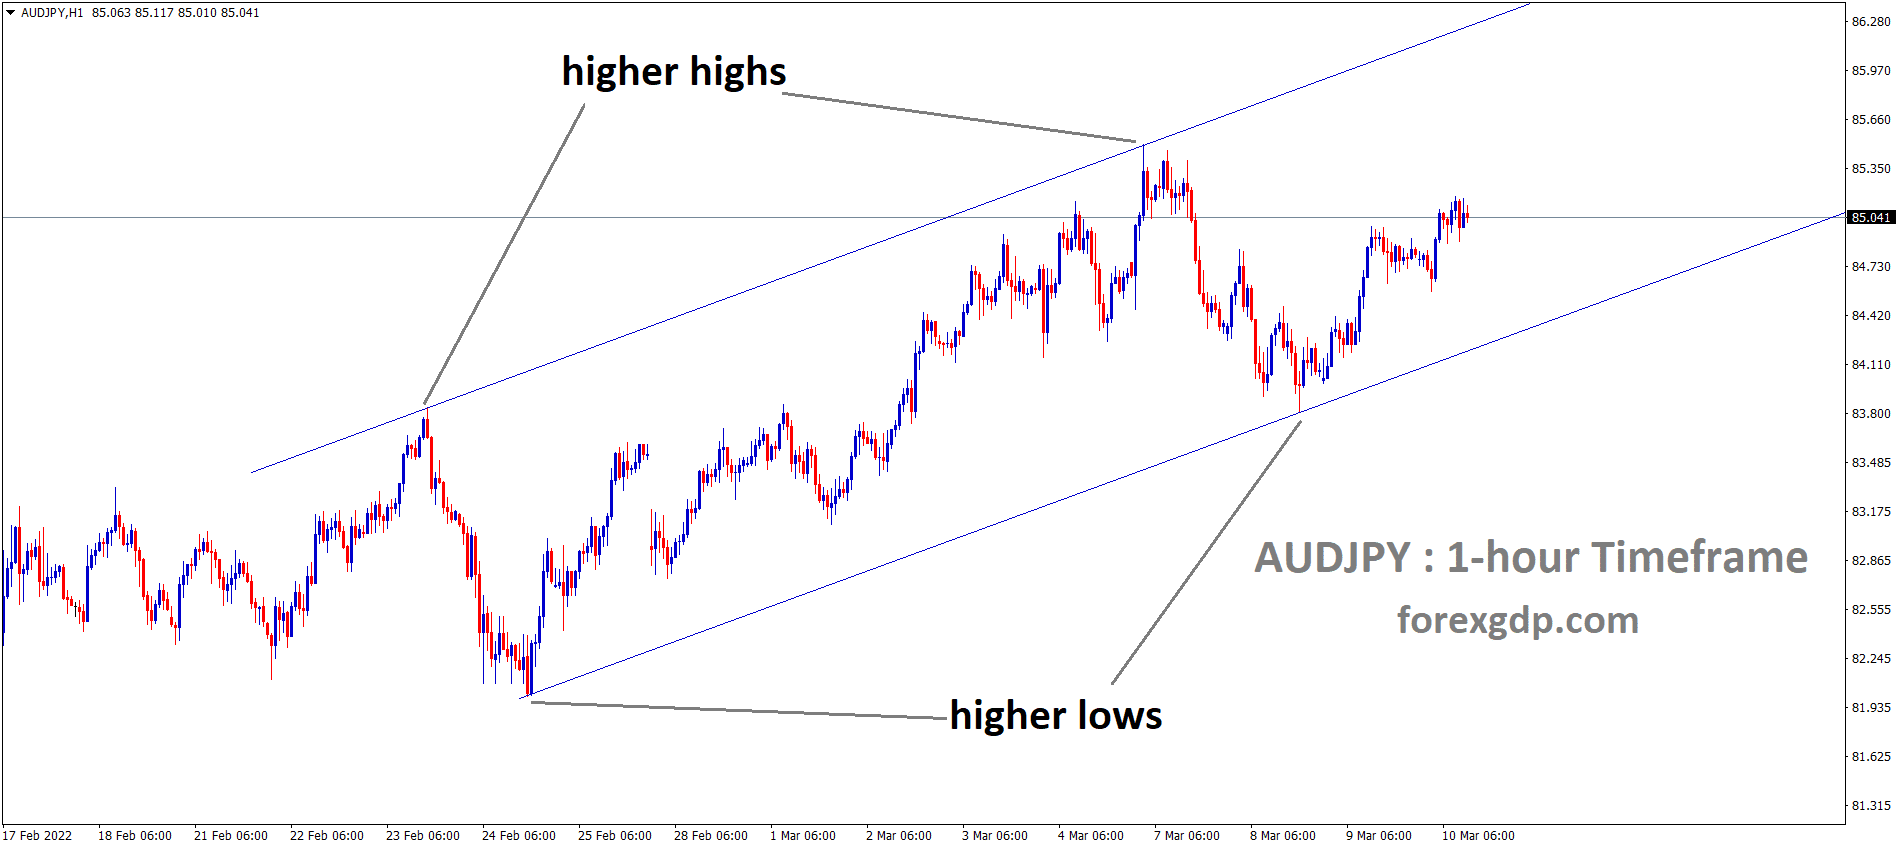 AUDJPY is moving in an Ascending channel and the market has rebounded from the higher low area of the Ascending channel